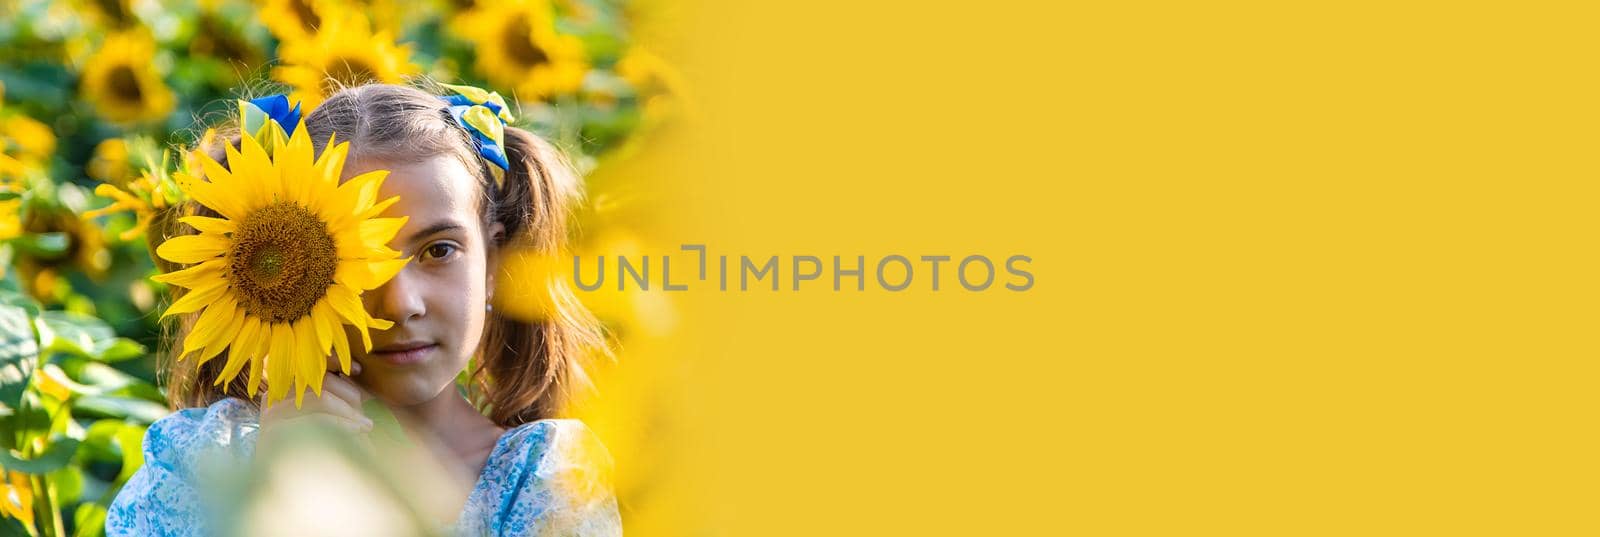 A child in a field of sunflowers. Ukraine. Selective focus. Nature.